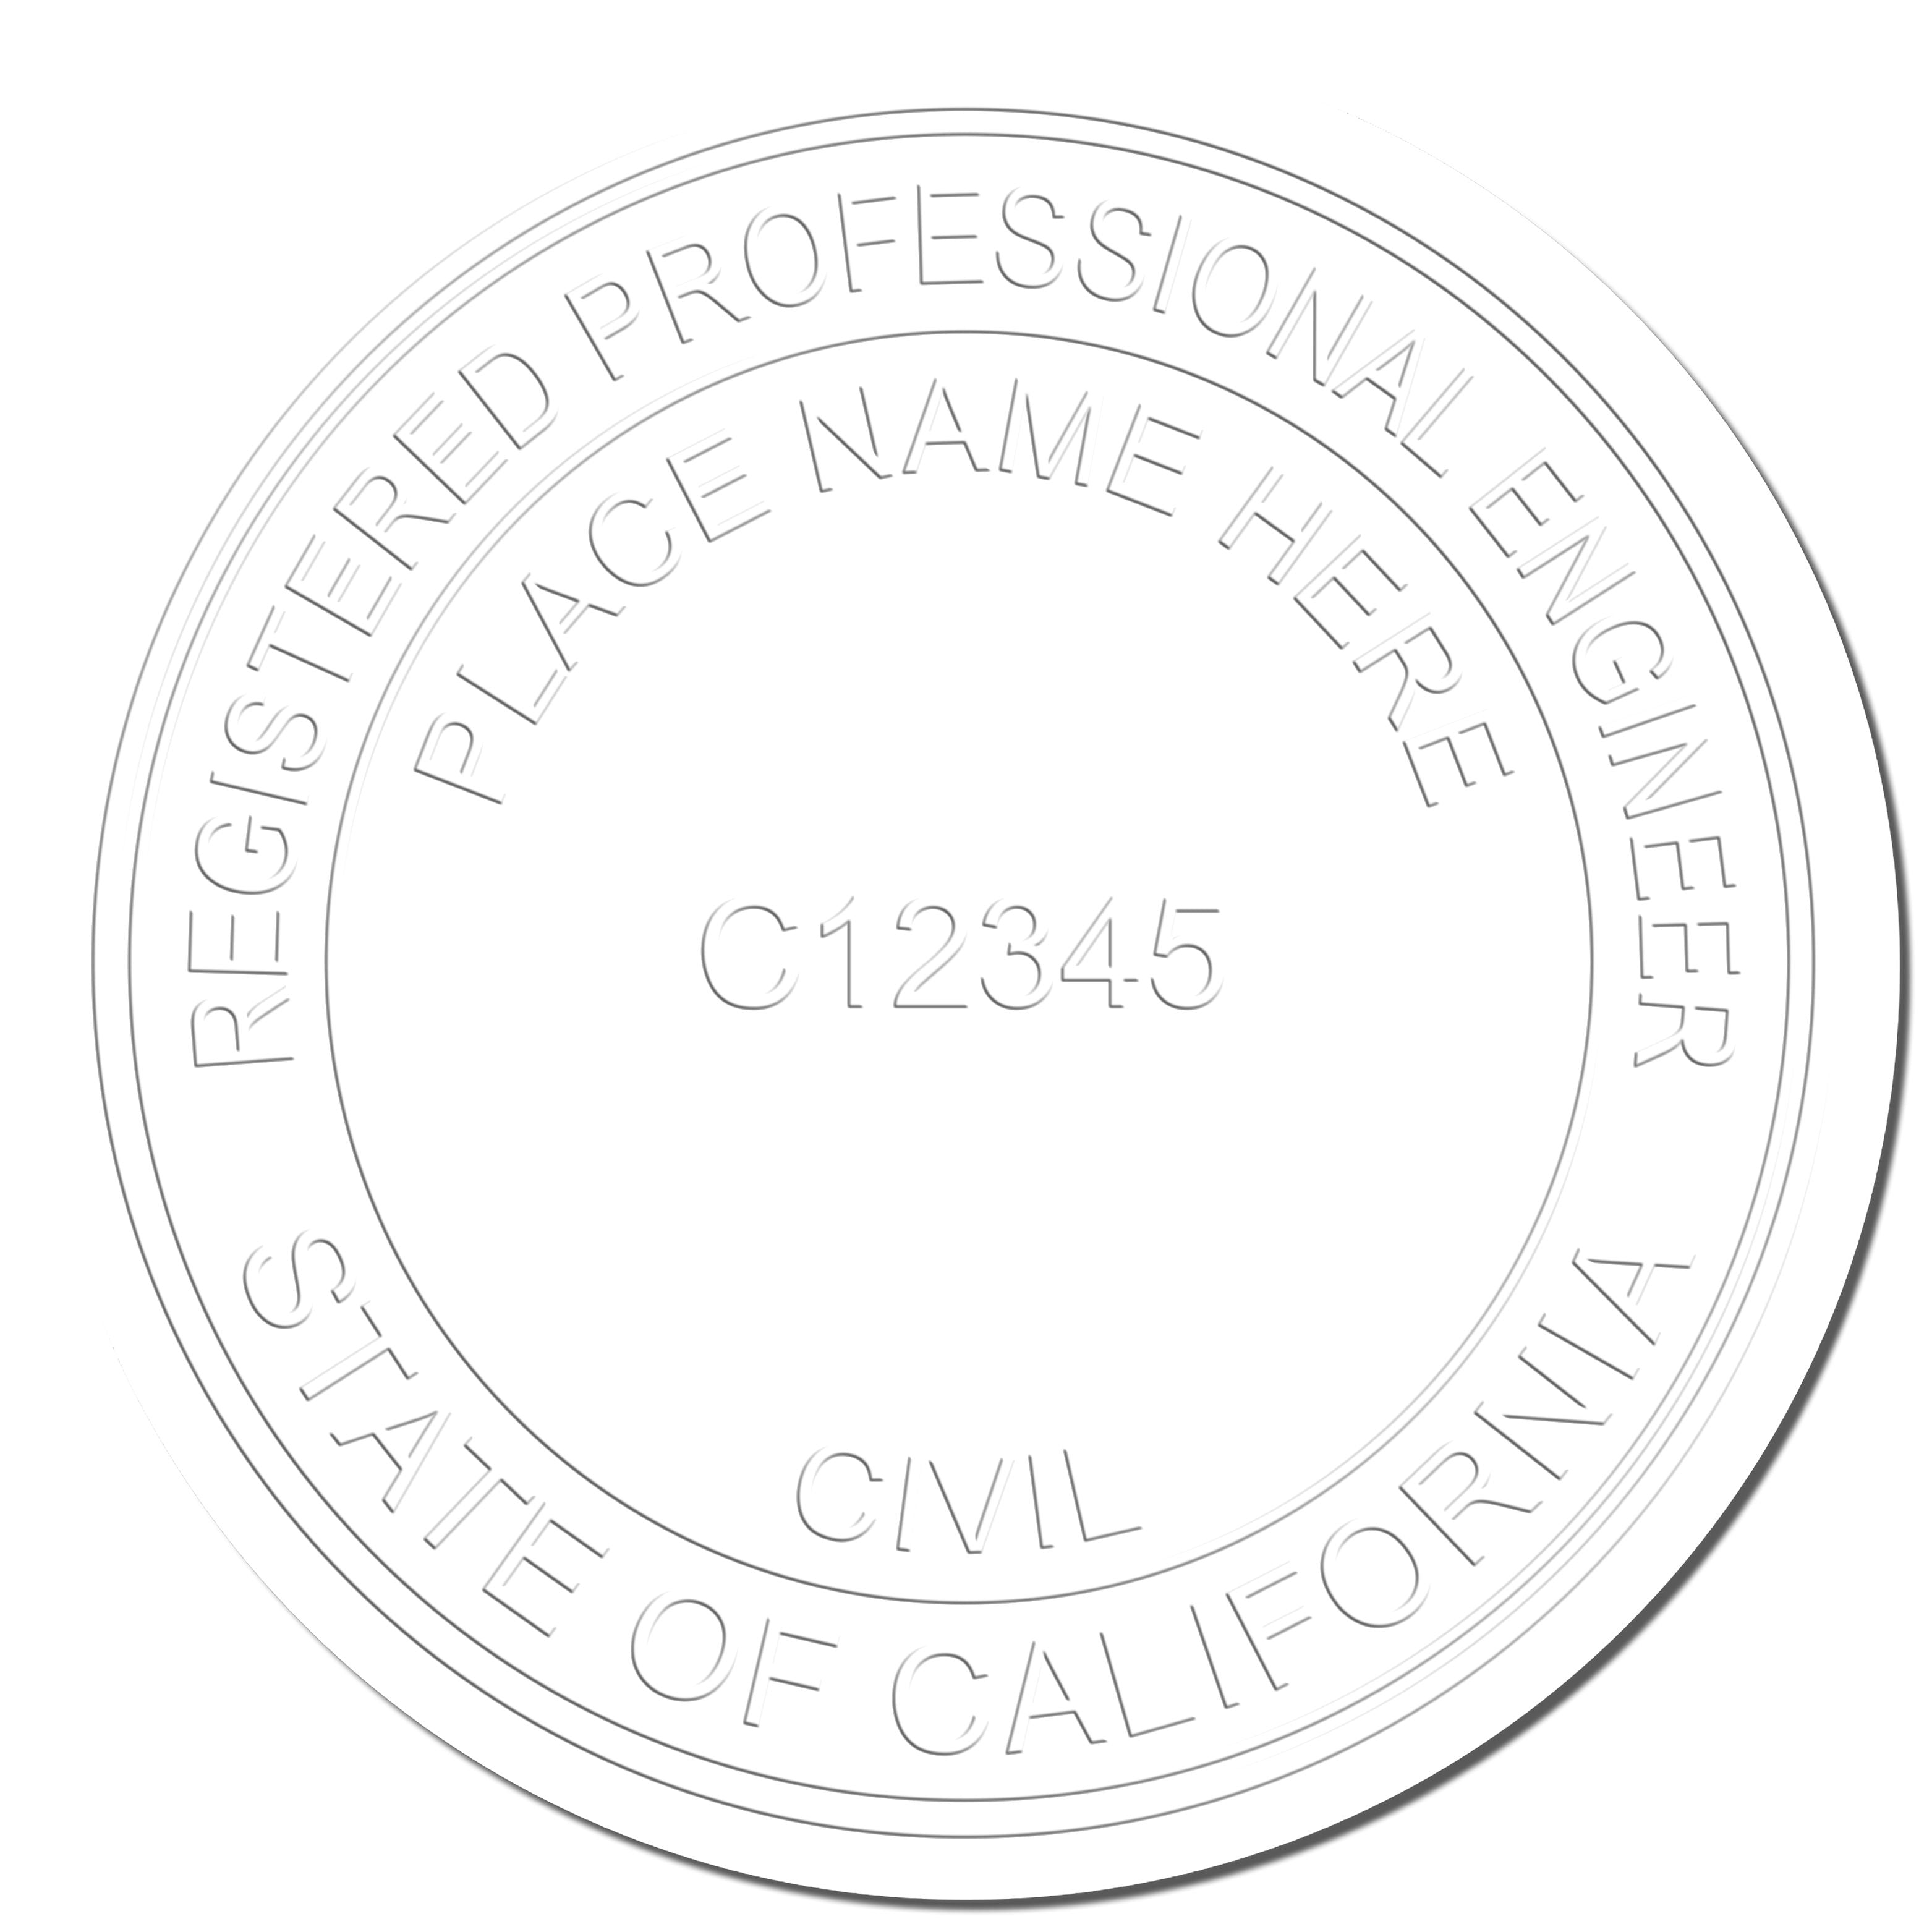 Another Example of a stamped impression of the California Engineer Desk Seal on a piece of office paper.